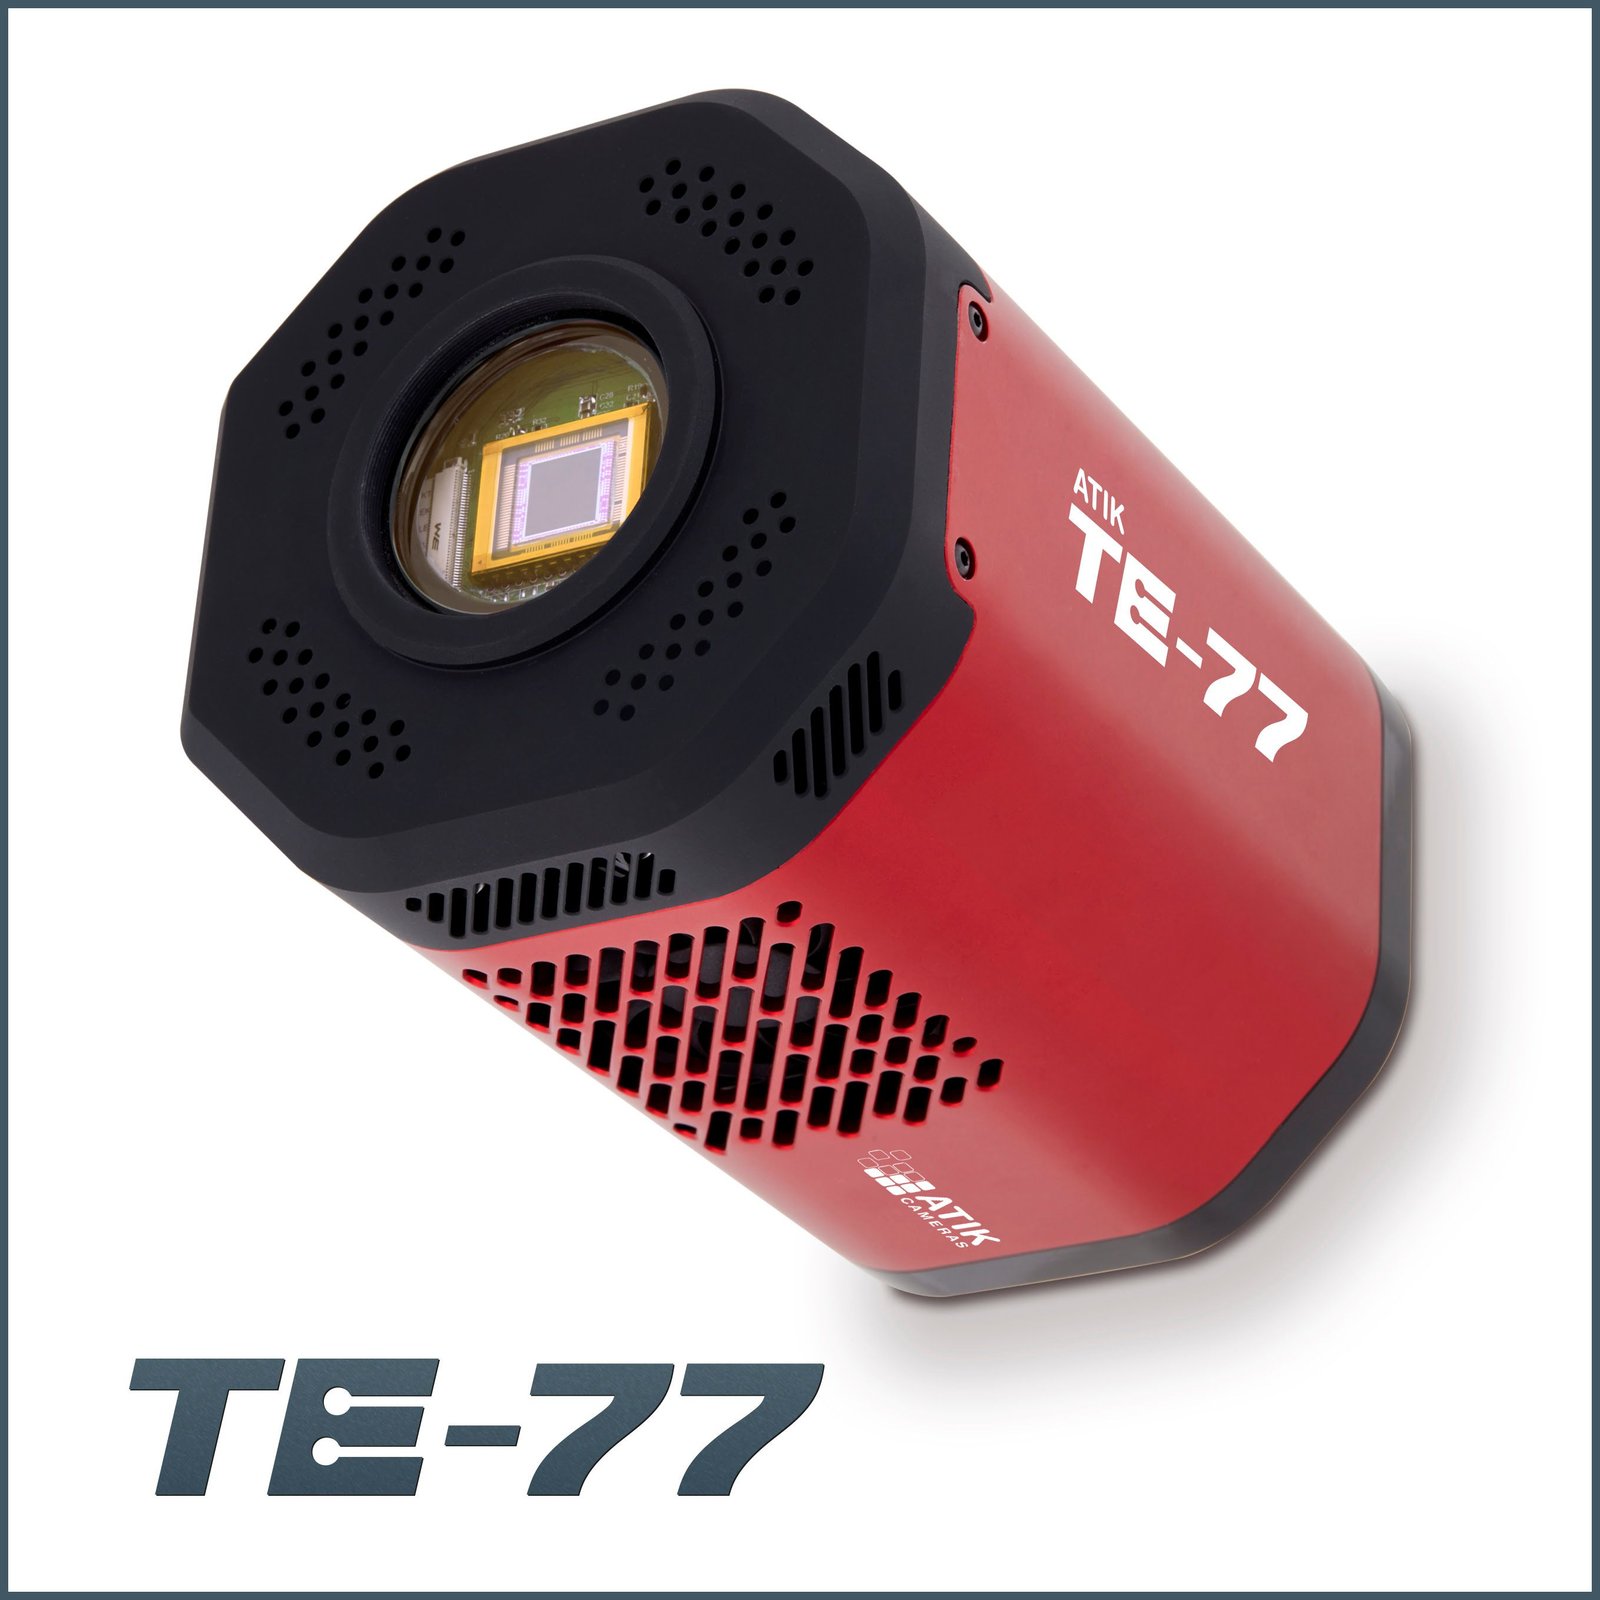 Atik Cameras launch the TE-77 for high performance scientific imaging.